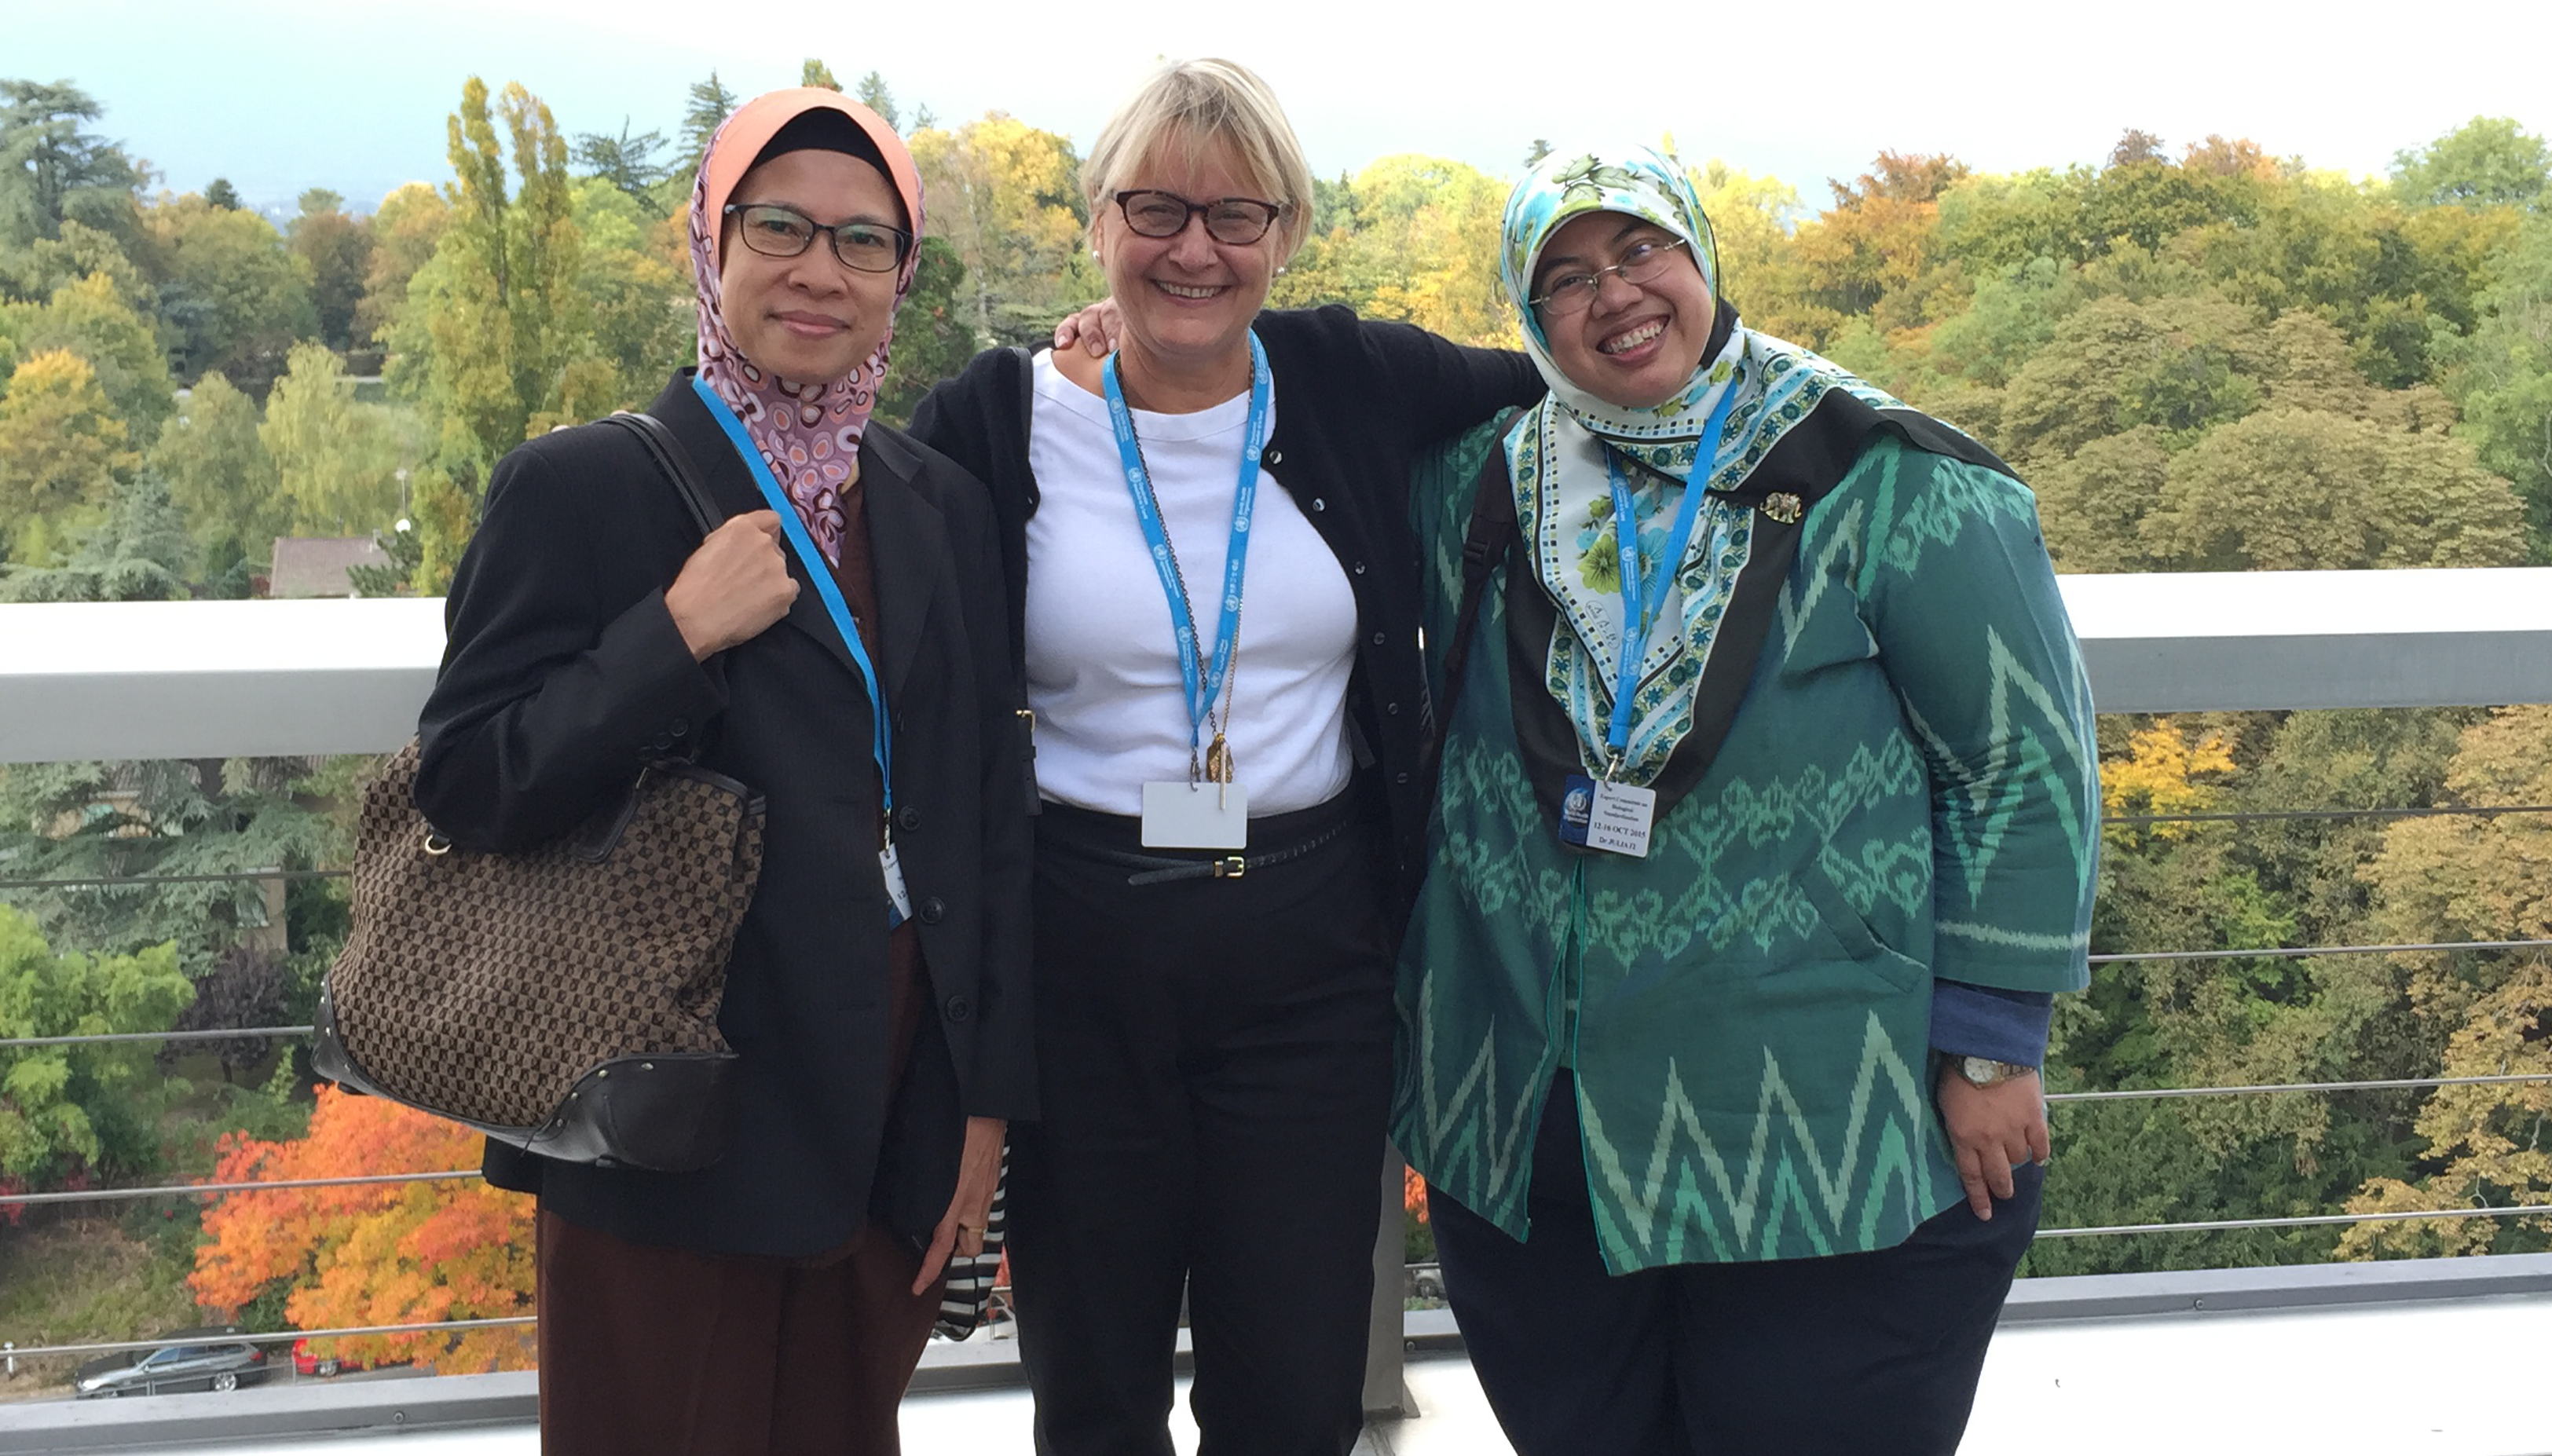 Kathryn Zoon and her colleagues at the World Health Organization in Geneva